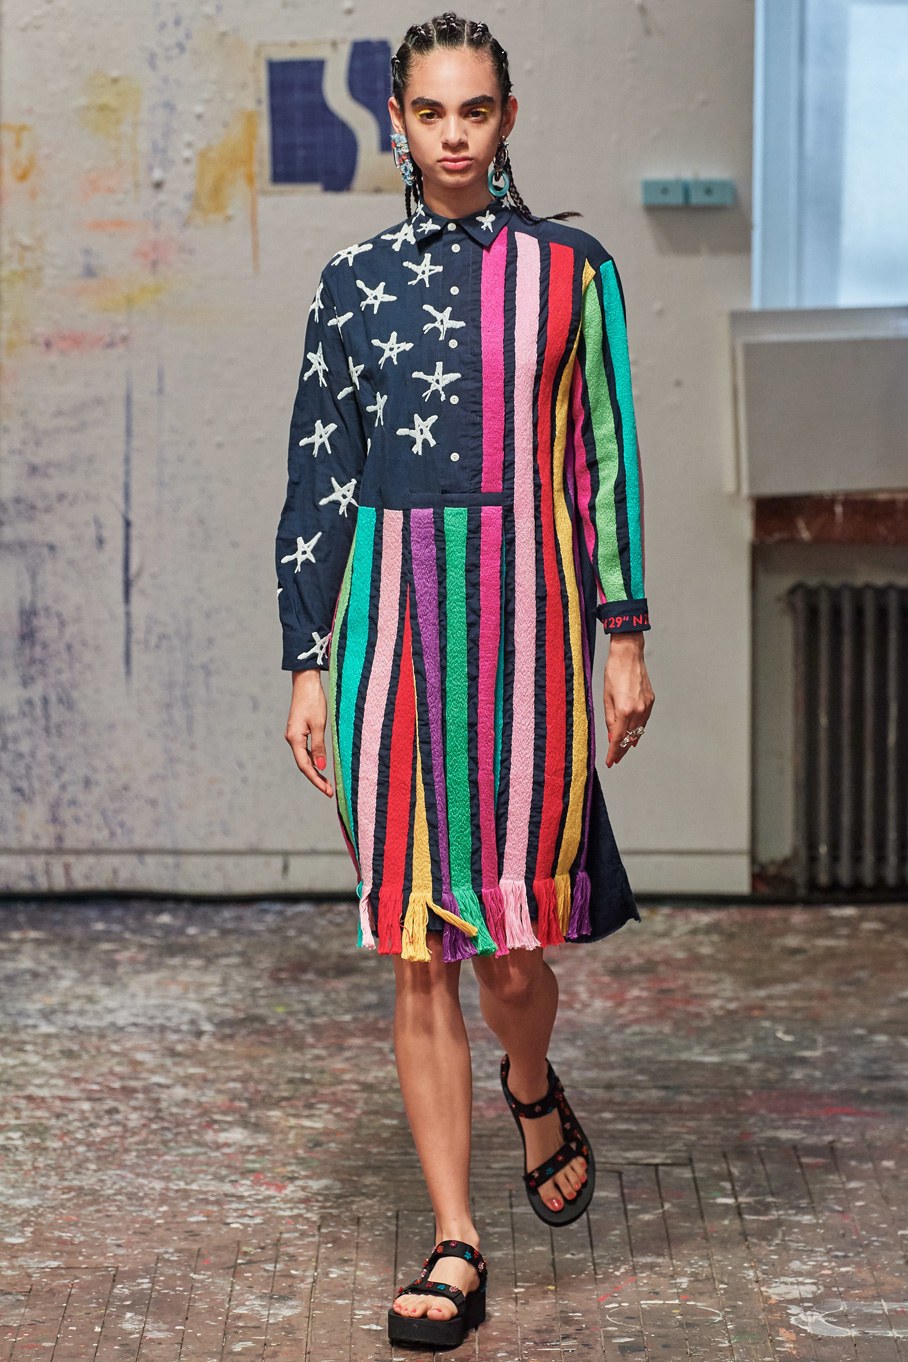 Johnanthan Cohen Spring Ready to wear 2020 - Why Jonathan Cohen prefers to call his brand "responsible", not "sustainable"